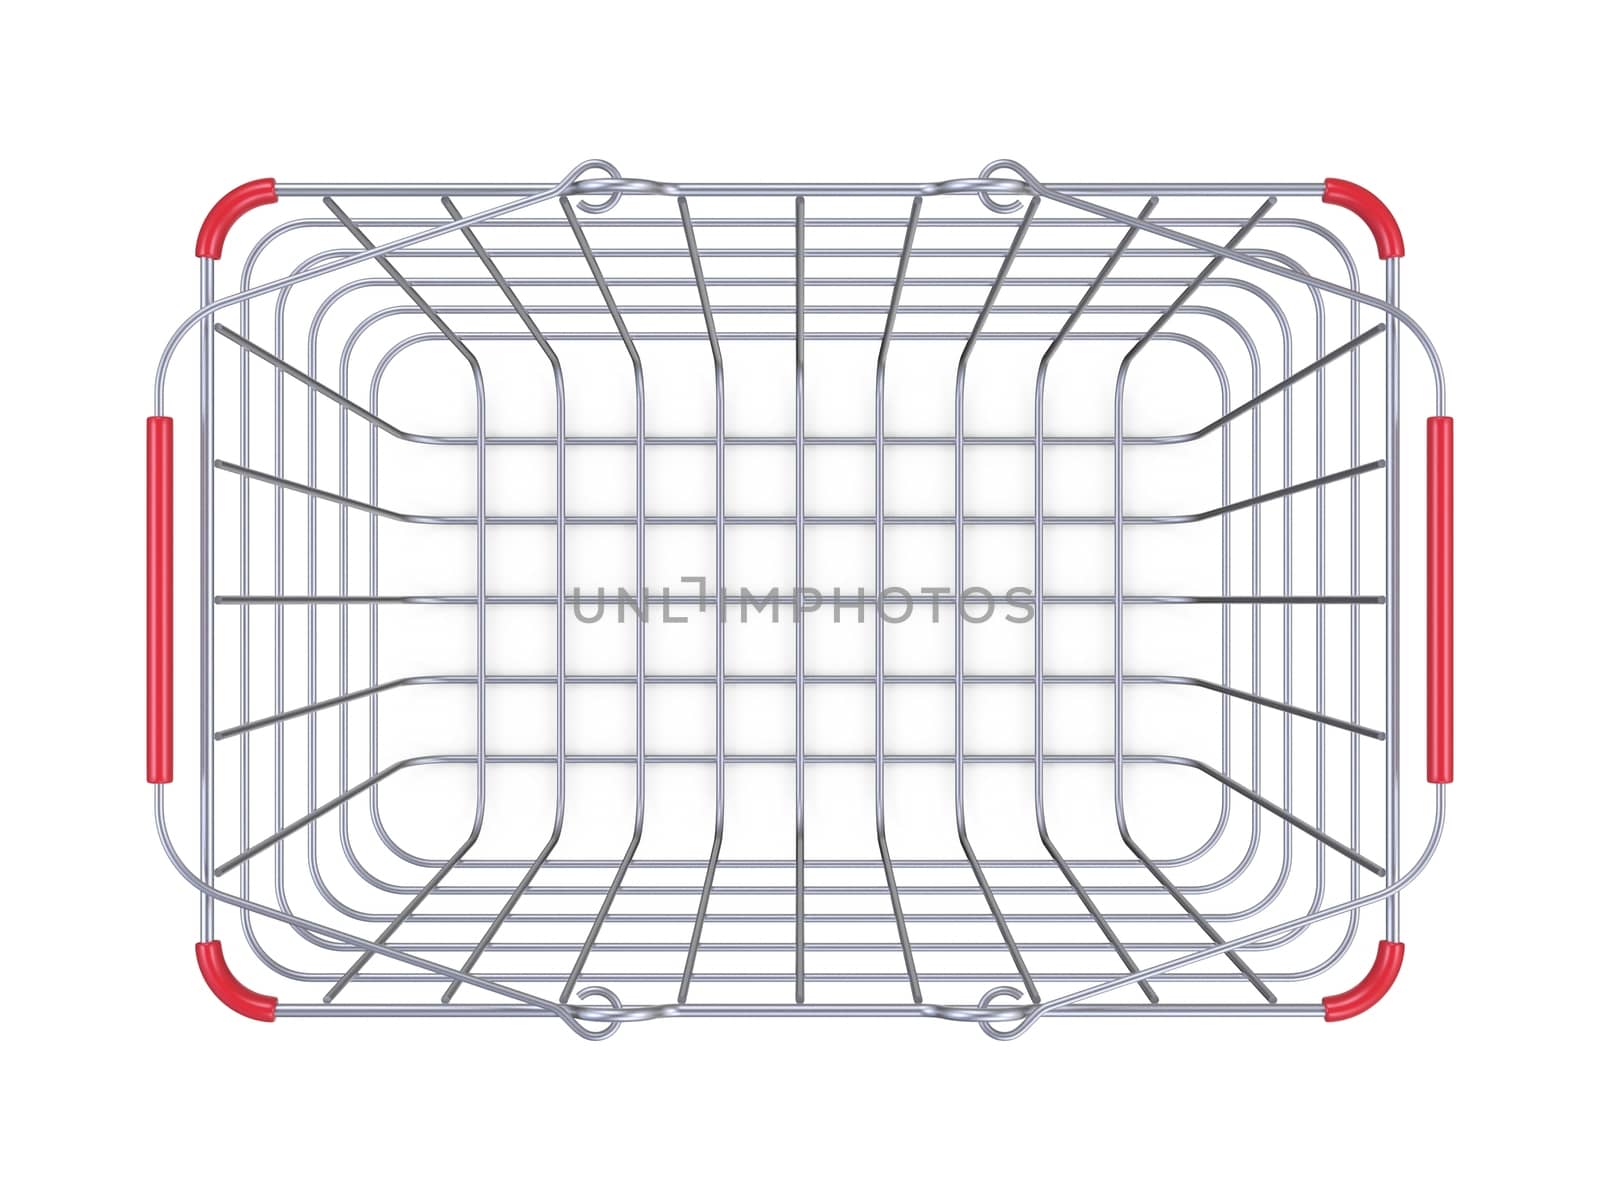 Metal shopping basket top view 3D render illustration isolated on white background